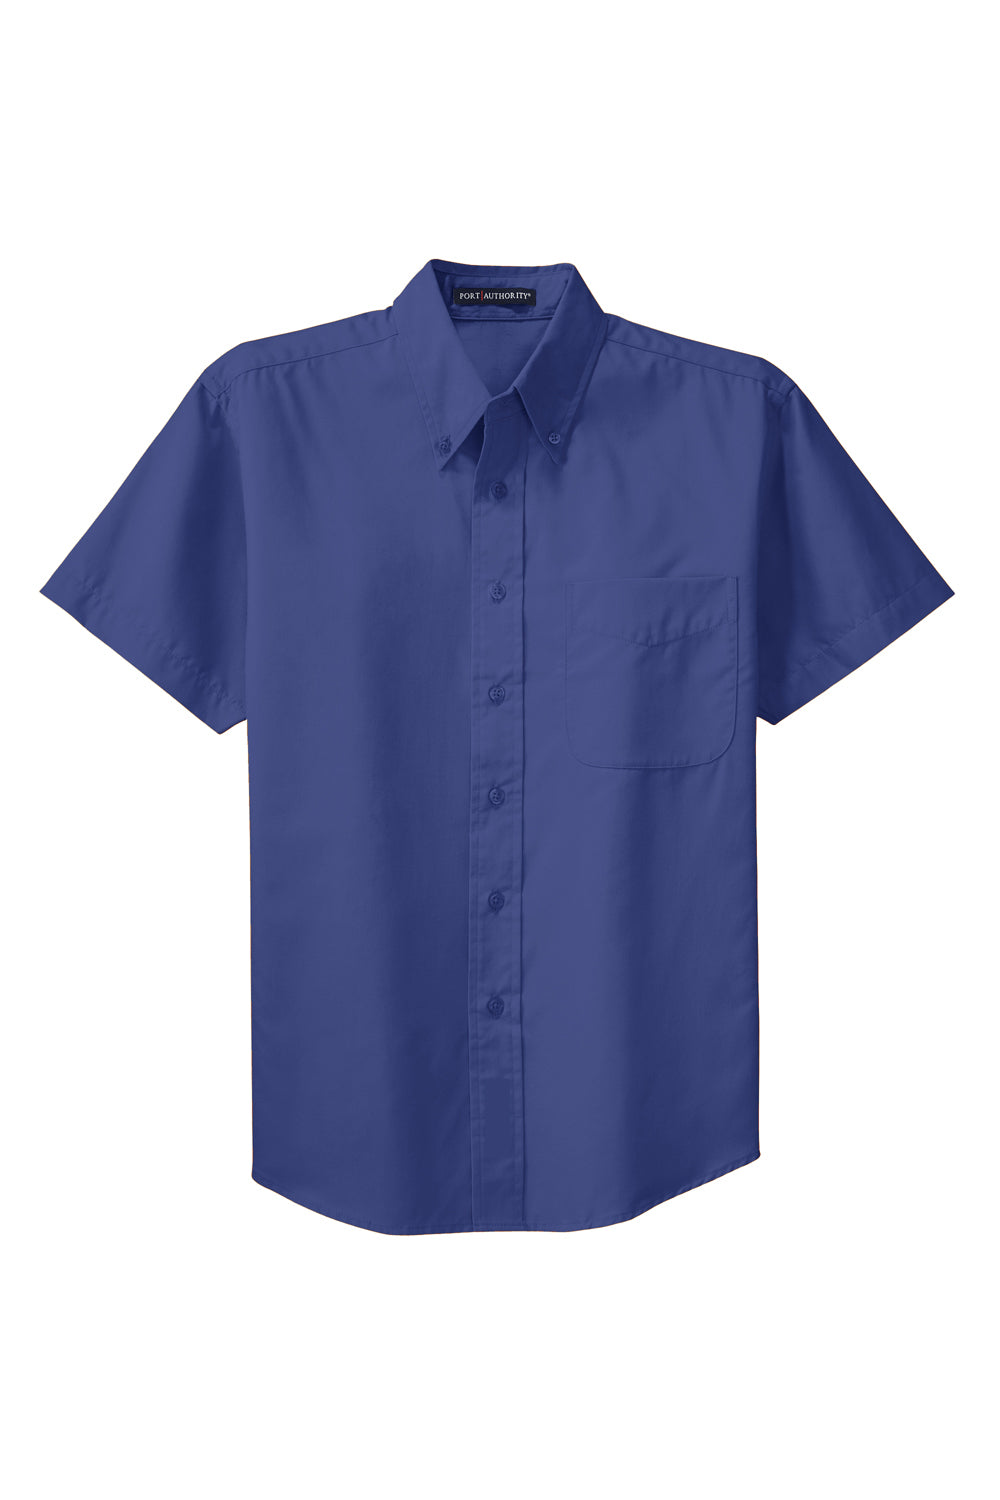 Port Authority S508/TLS508 Mens Easy Care Wrinkle Resistant Short Sleeve Button Down Shirt w/ Pocket Mediterranean Blue Flat Front